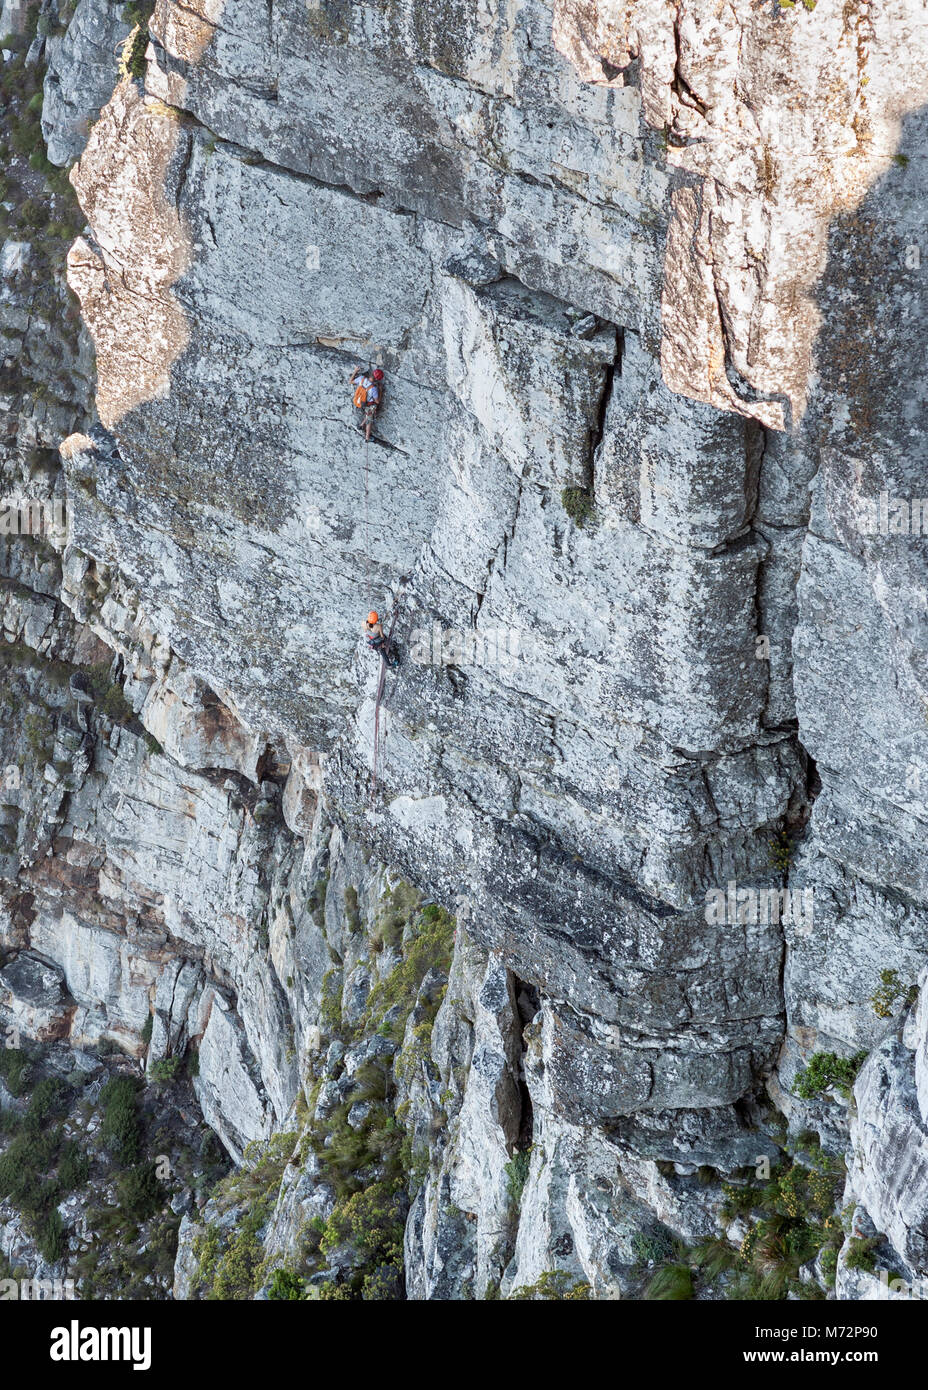 Rock climbers on the Africa Crag rock face just below the summit of Table Mountain in Cape Town. Stock Photo